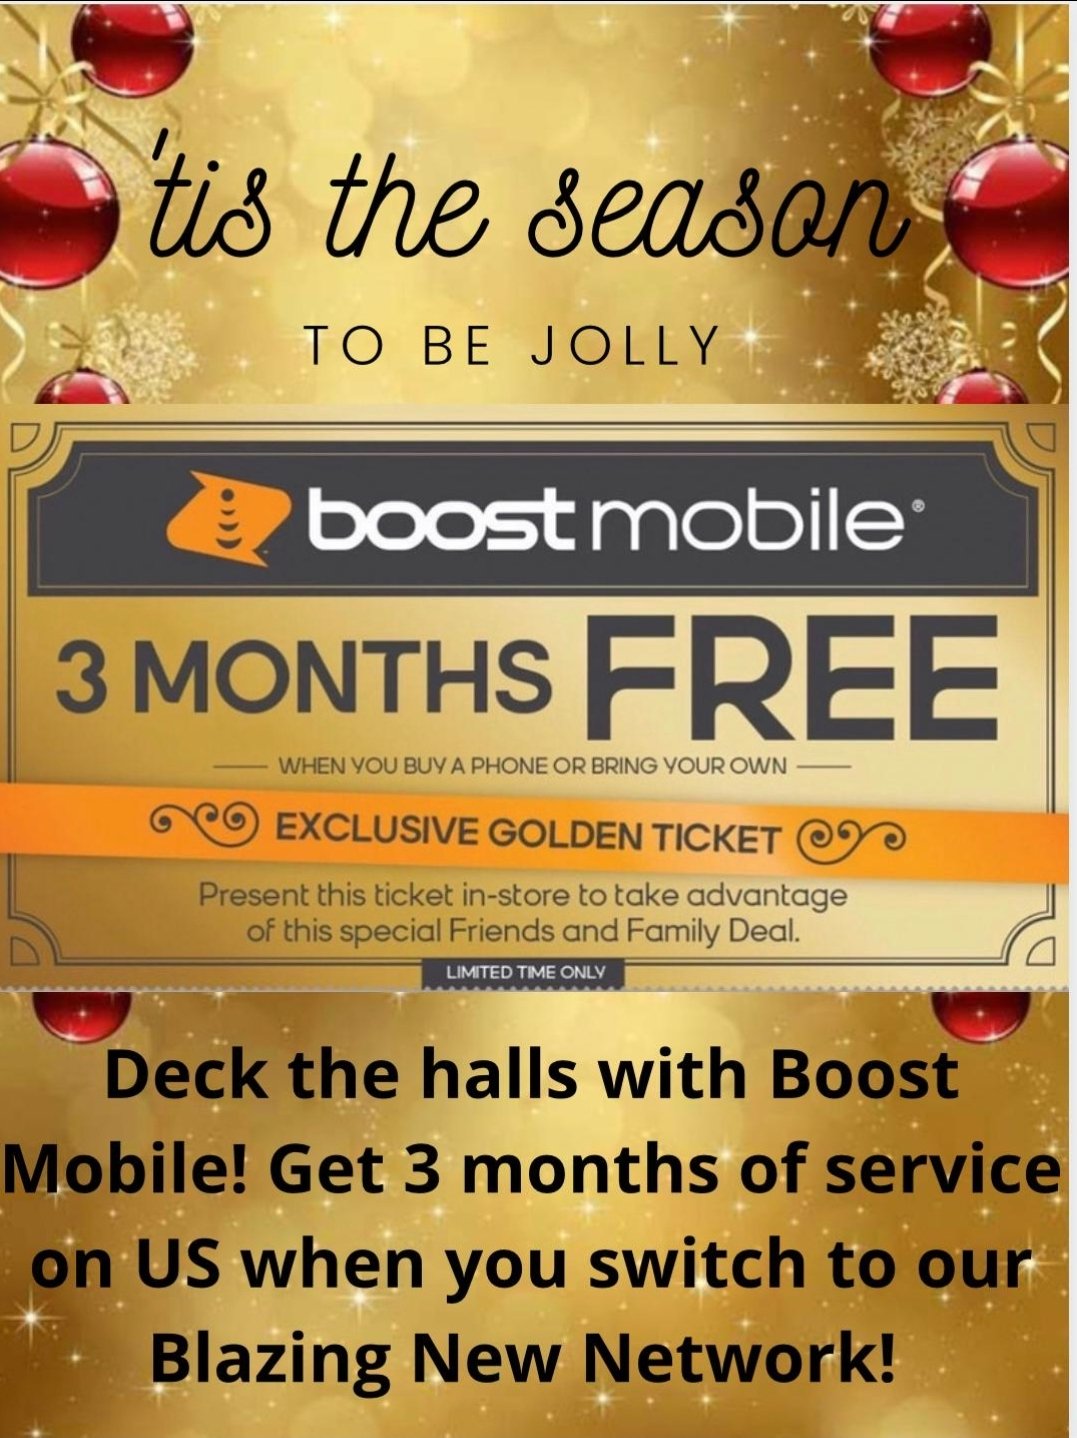 Tony Pinal retweeted:
 
			
 
			 
 
				Golden Ticket day TODAY! Get 3 MONTHS FREE!!! Visit your nearest Boost Mobile locations in  #Brooklyn on any Friday in December & Get 3 MONTHS FREE on Boost Mobile!! What an amazing offer in the Season of Giving!! 🎄🎁